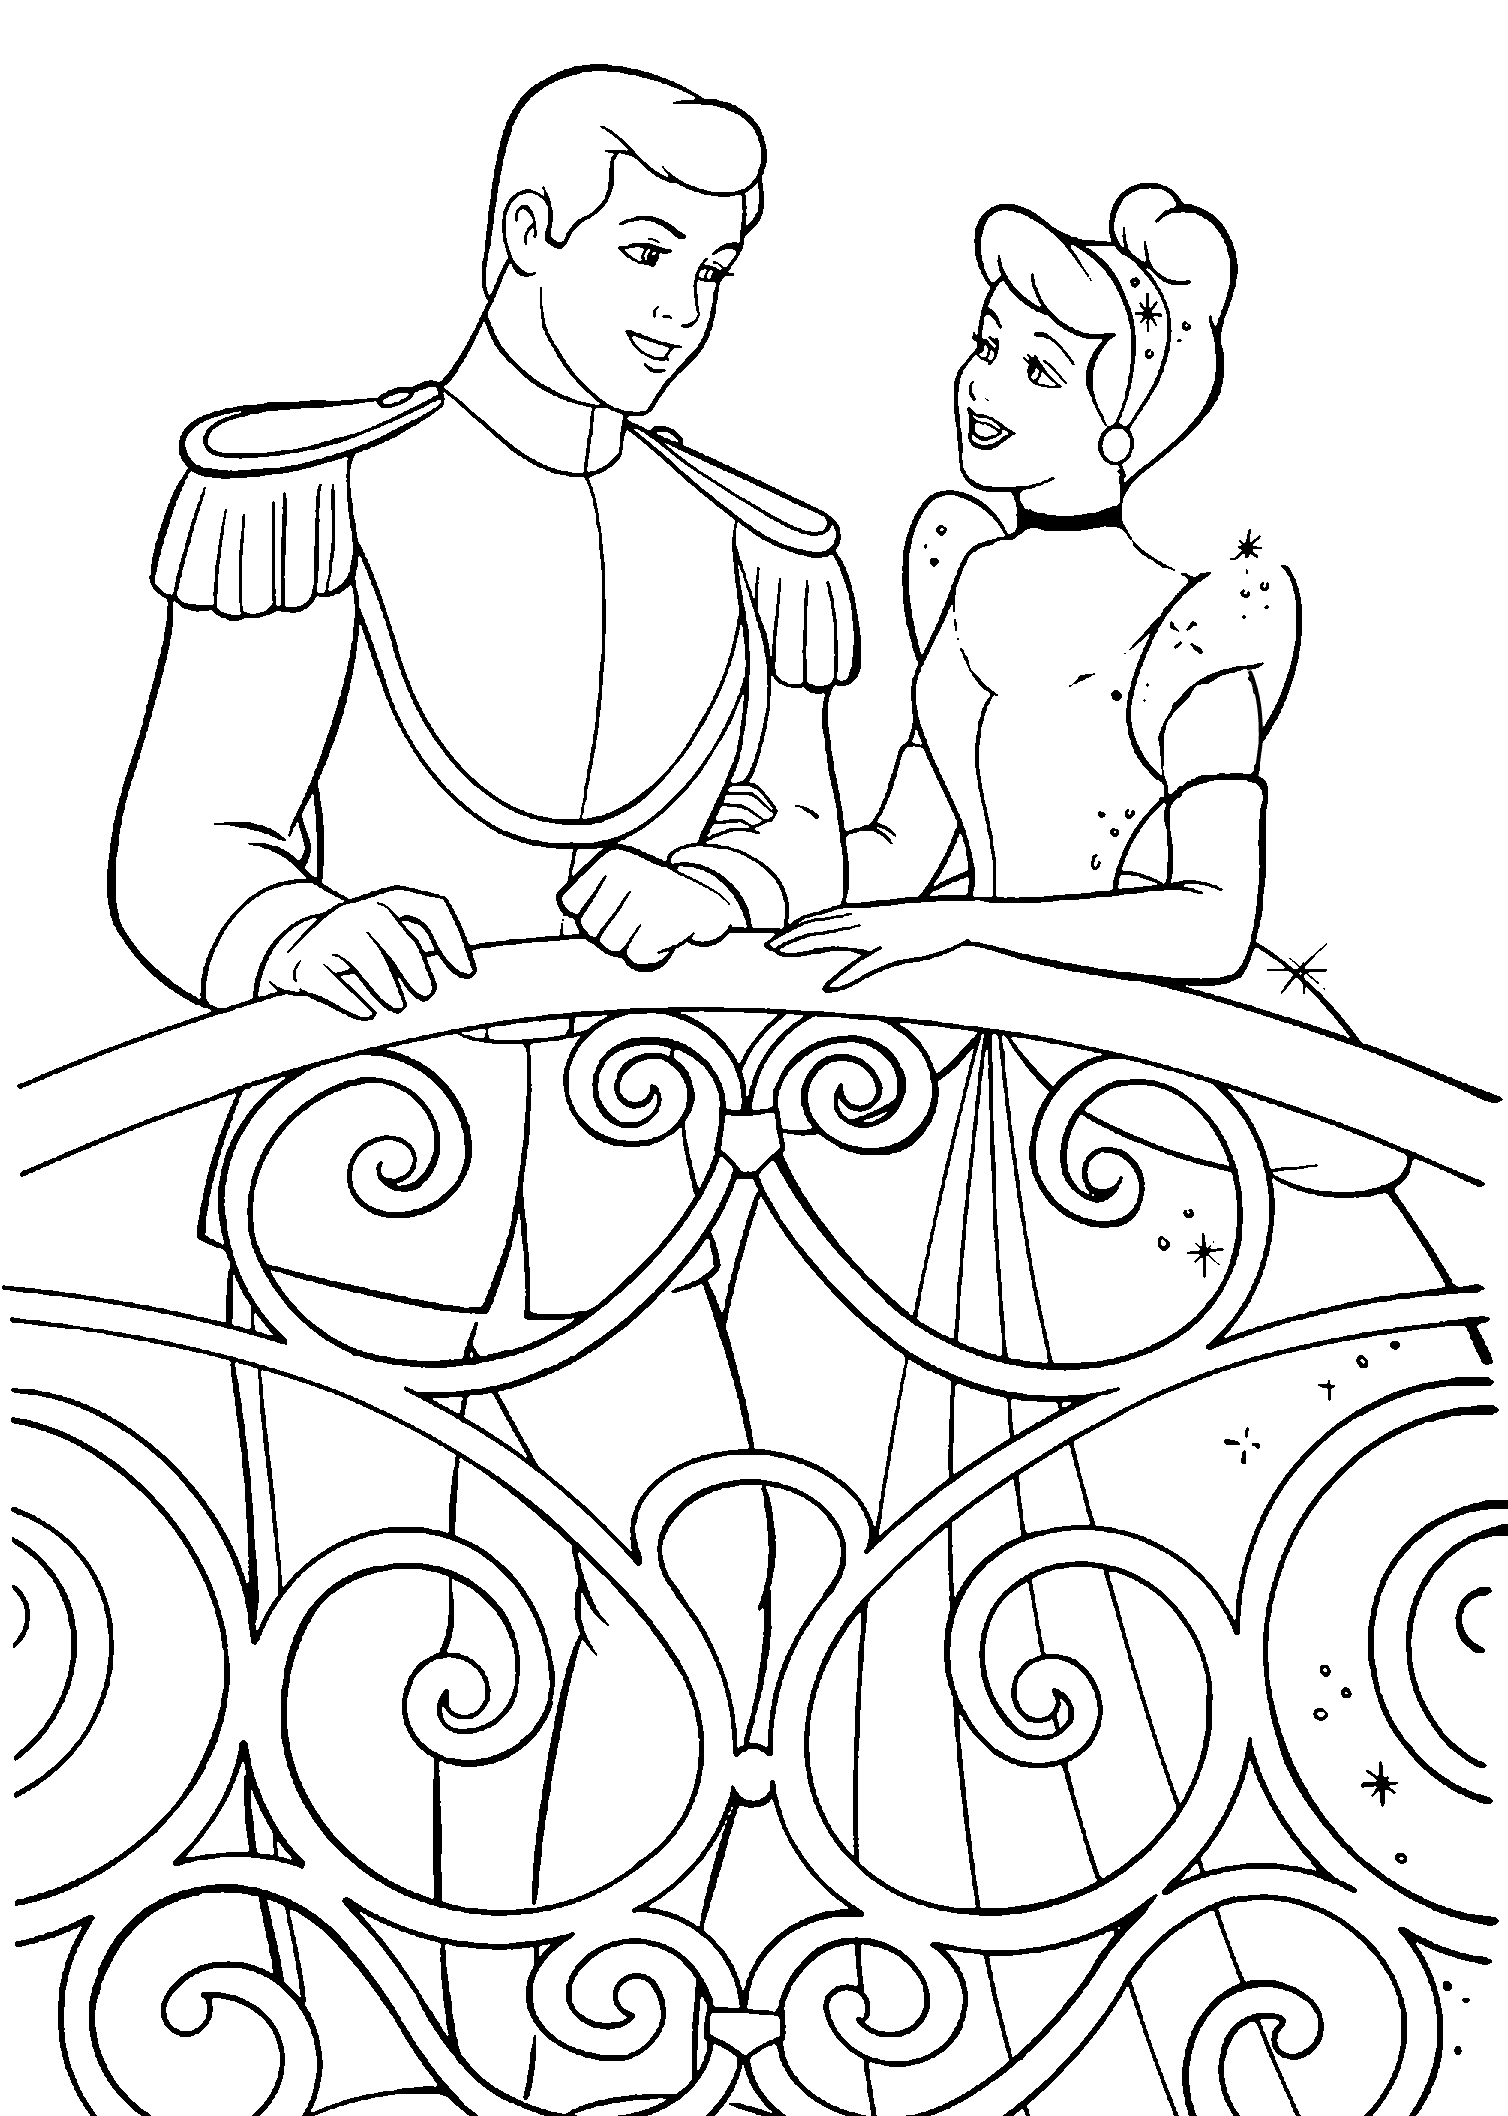 Free Printable Disney Princess Coloring Pages For Kids BEDECOR Free Coloring Picture wallpaper give a chance to color on the wall without getting in trouble! Fill the walls of your home or office with stress-relieving [bedroomdecorz.blogspot.com]